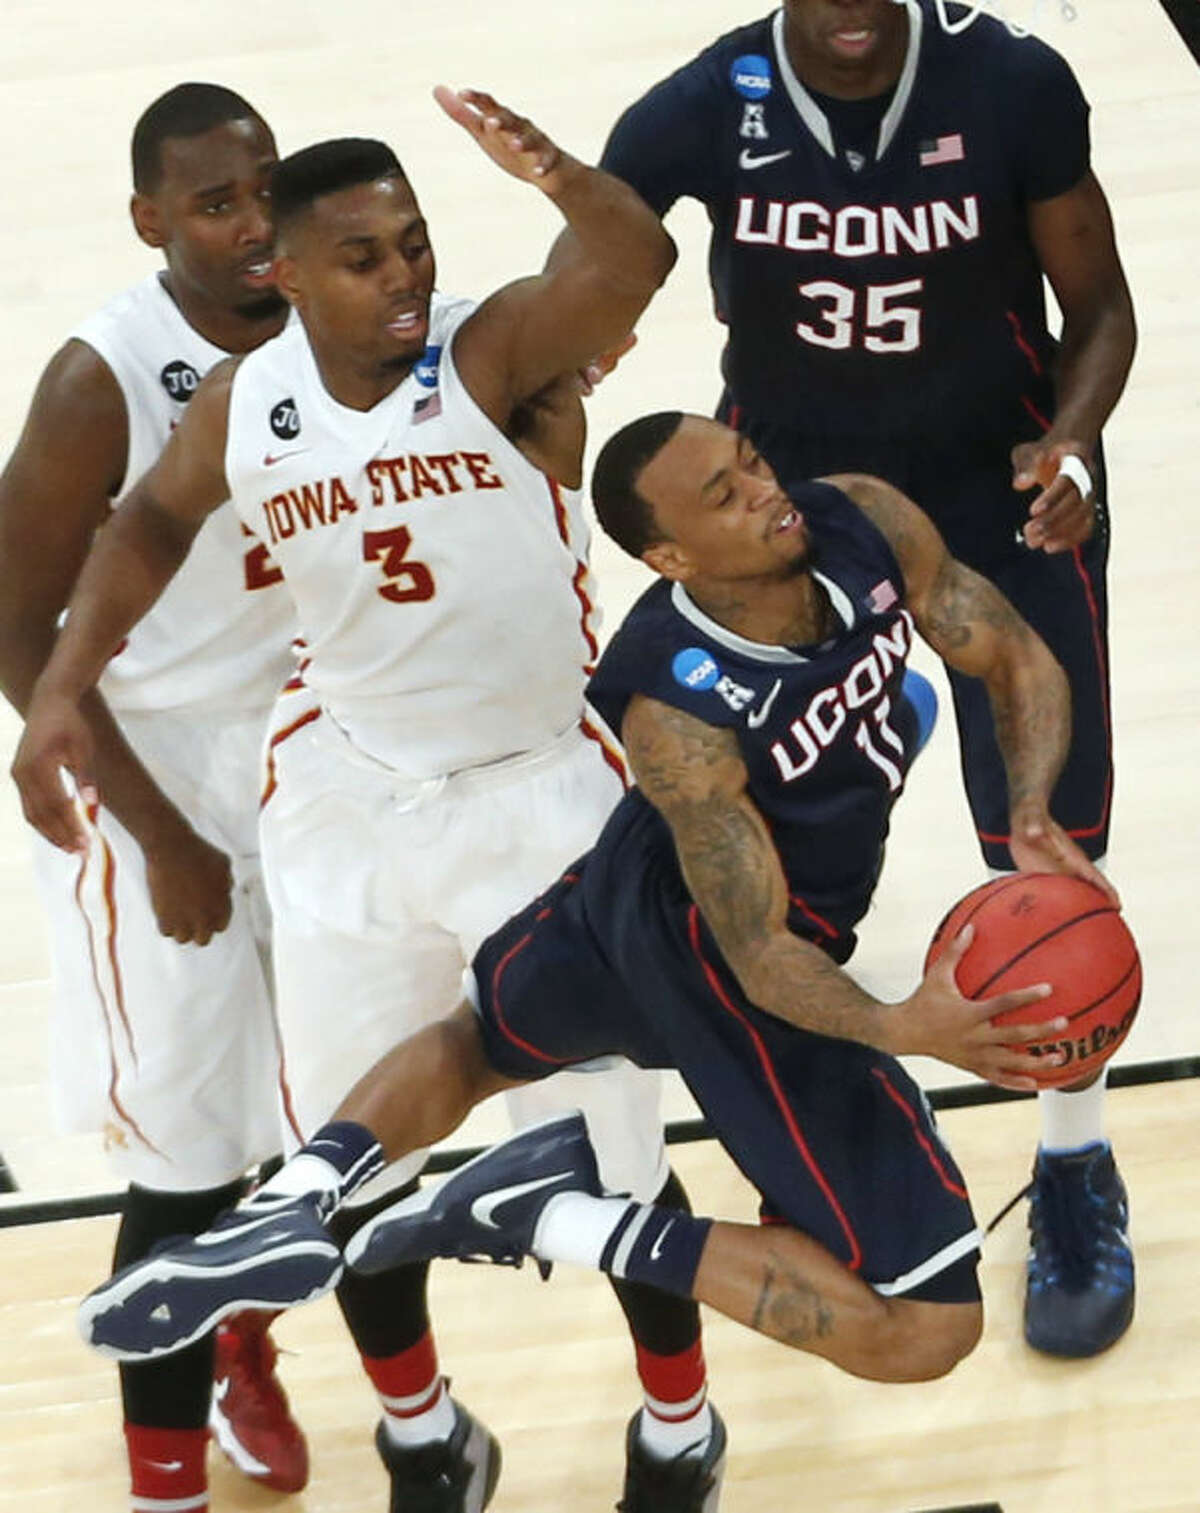 Connecticut's Ryan Boatright drives near Iowa State's Melvin Ejim, center, and Dustin Hogue, left, during the second half in a regional semifinal of the NCAA men's college basketball tournament Friday, March 28, 2014, in New York. (AP Photo/Julio Cortez)